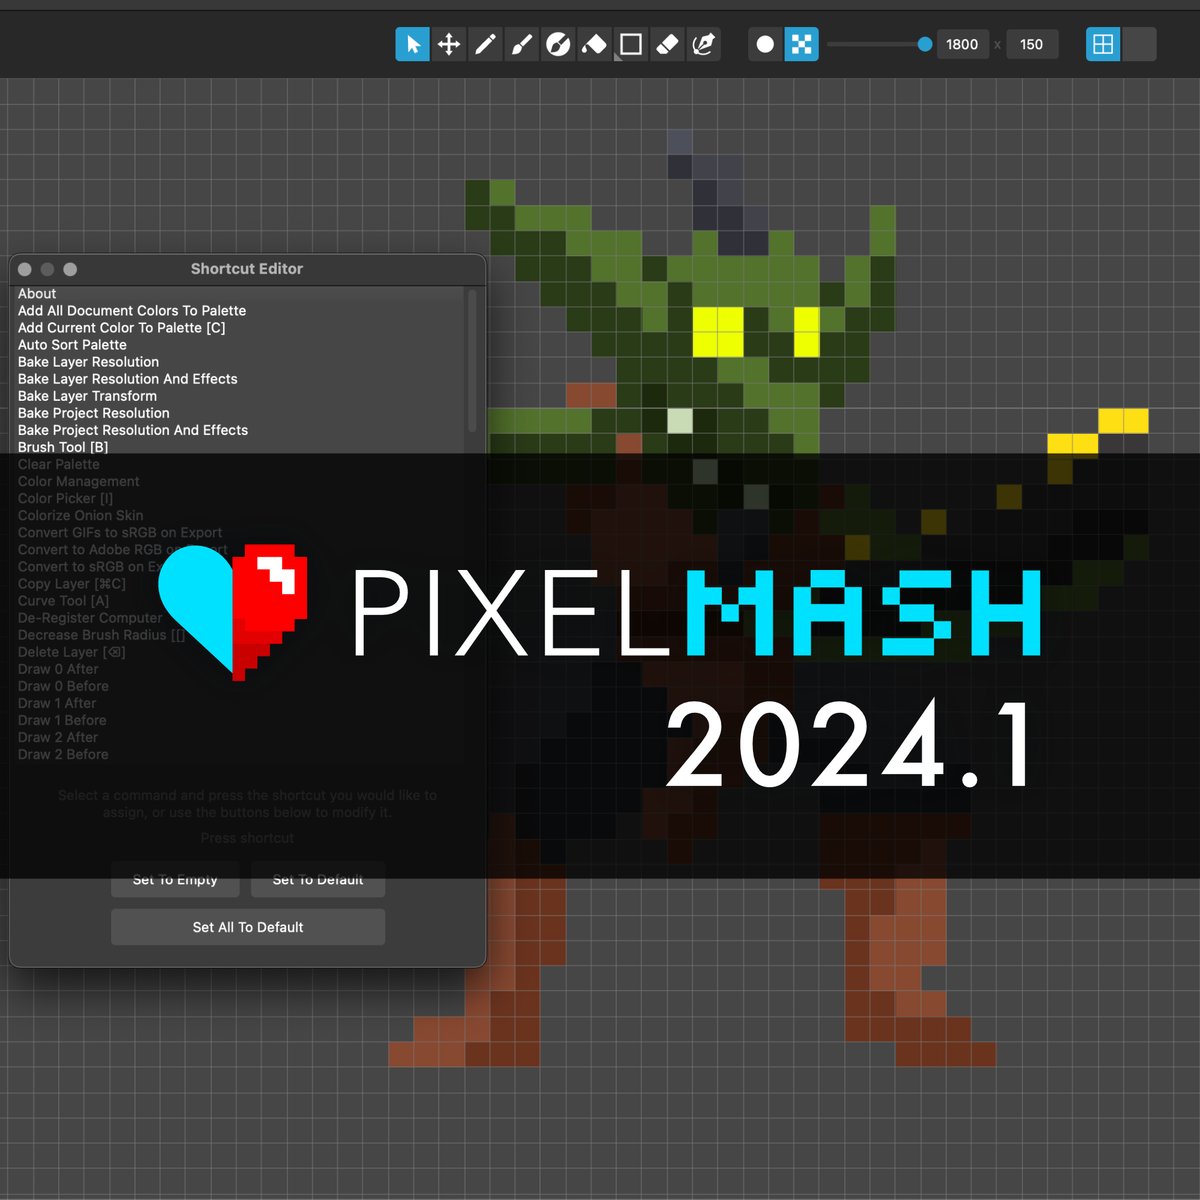 ICYMI, Pixelmash 2024.1 is live, and it's a FREE update if your purchased or upgraded your license from our site in the last year! Check your code at nevercenter.com/upgrade #pixelart #pixels #ドット絵 #픽셀아트 #dotpict #retroart #digitalart #gamedev #gameart